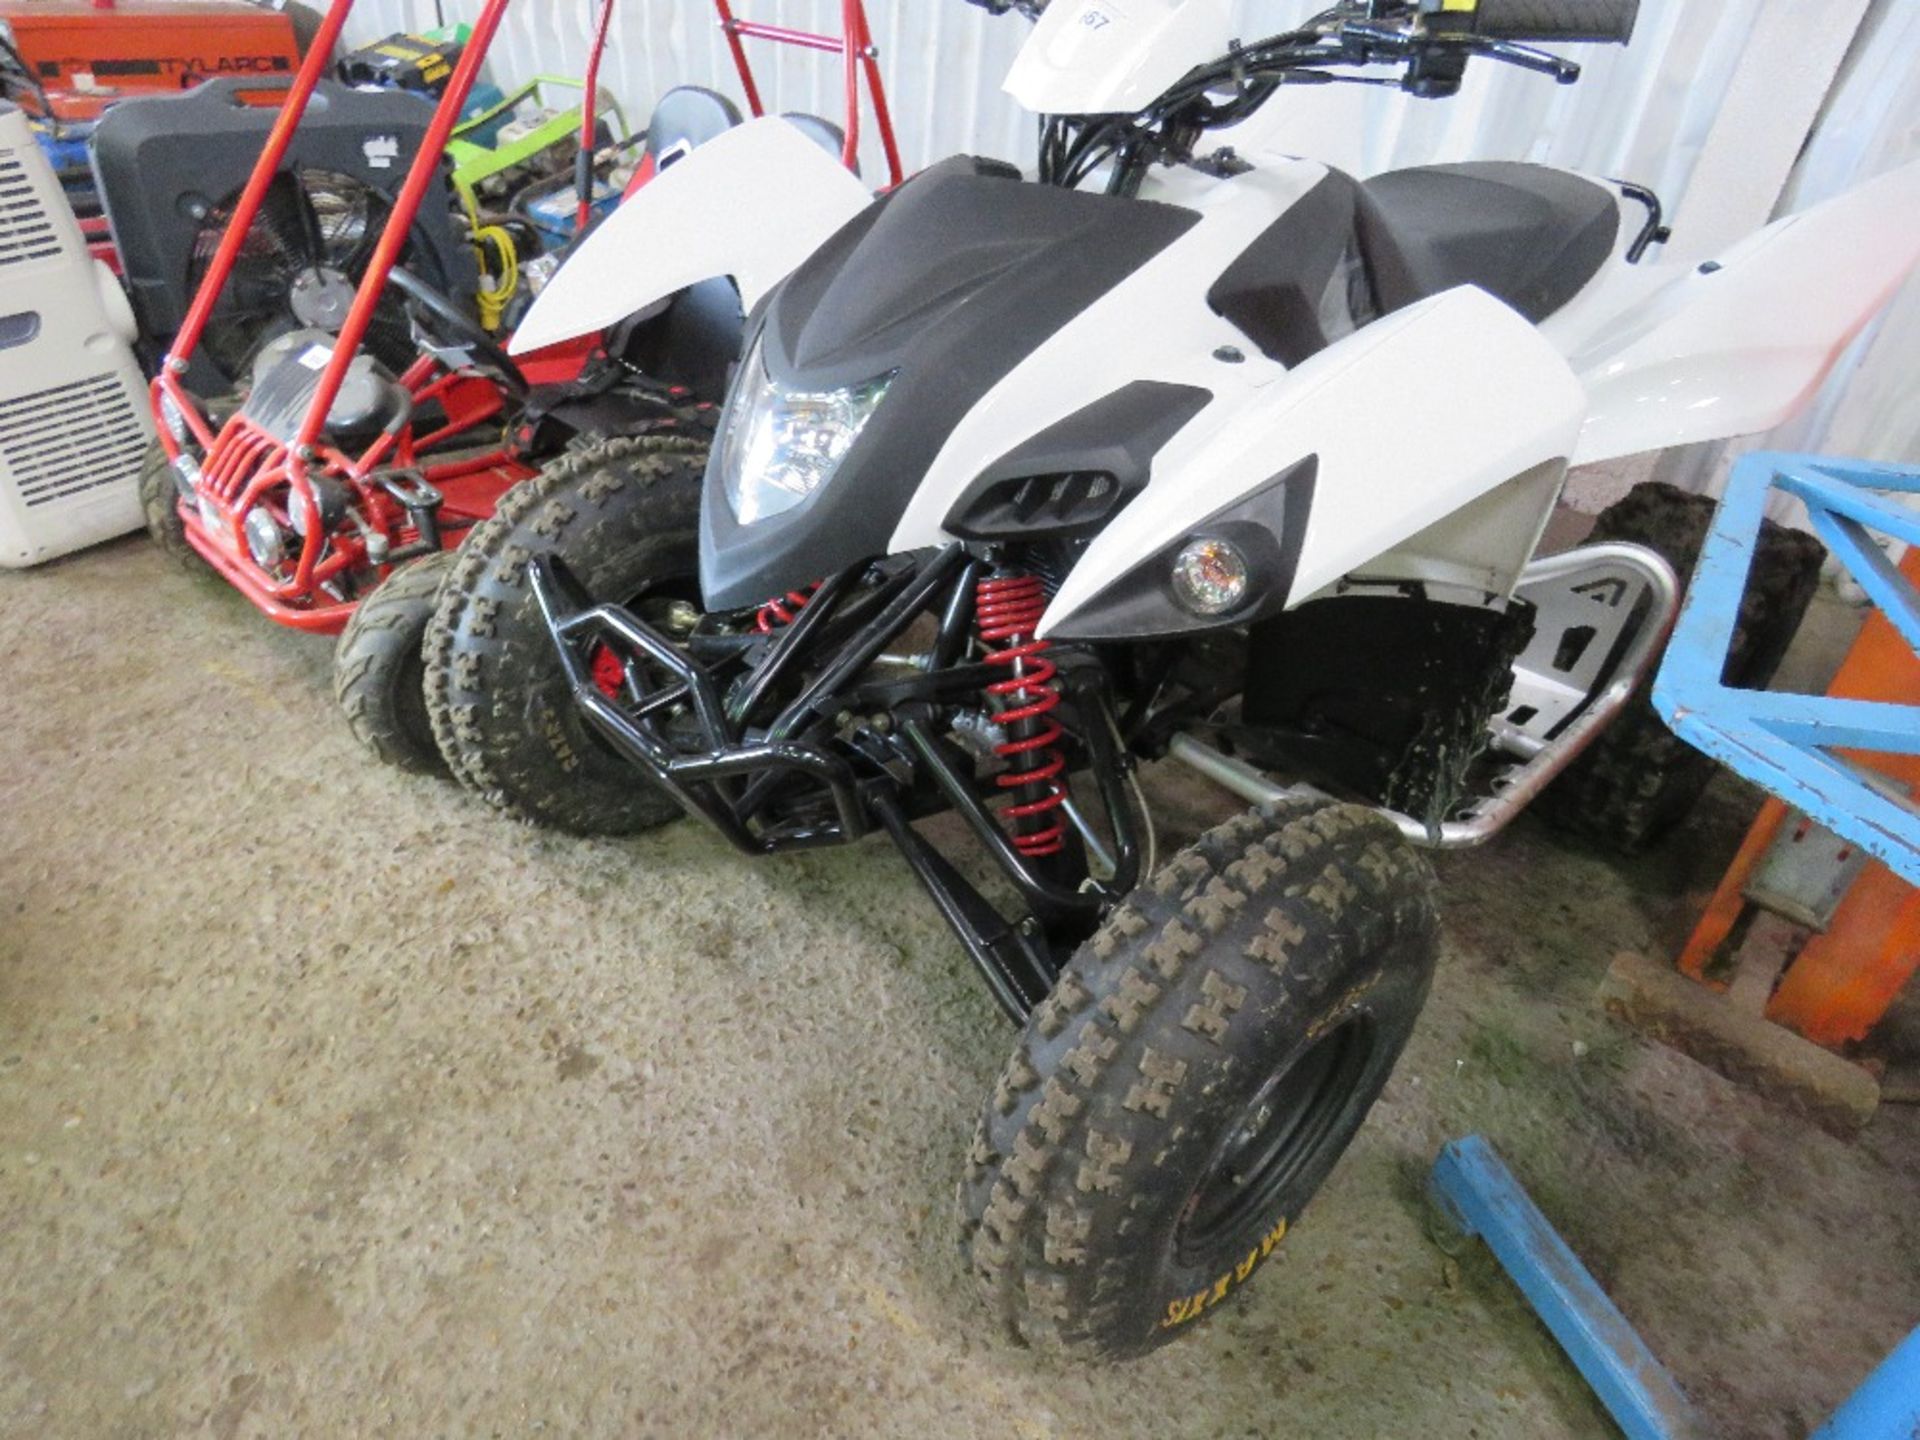 AEON 400 SPORT/ QUADZILLA RACING QUAD BIKE. 1MILE FROM NEW, UNWANTED GIFT. - Image 2 of 7